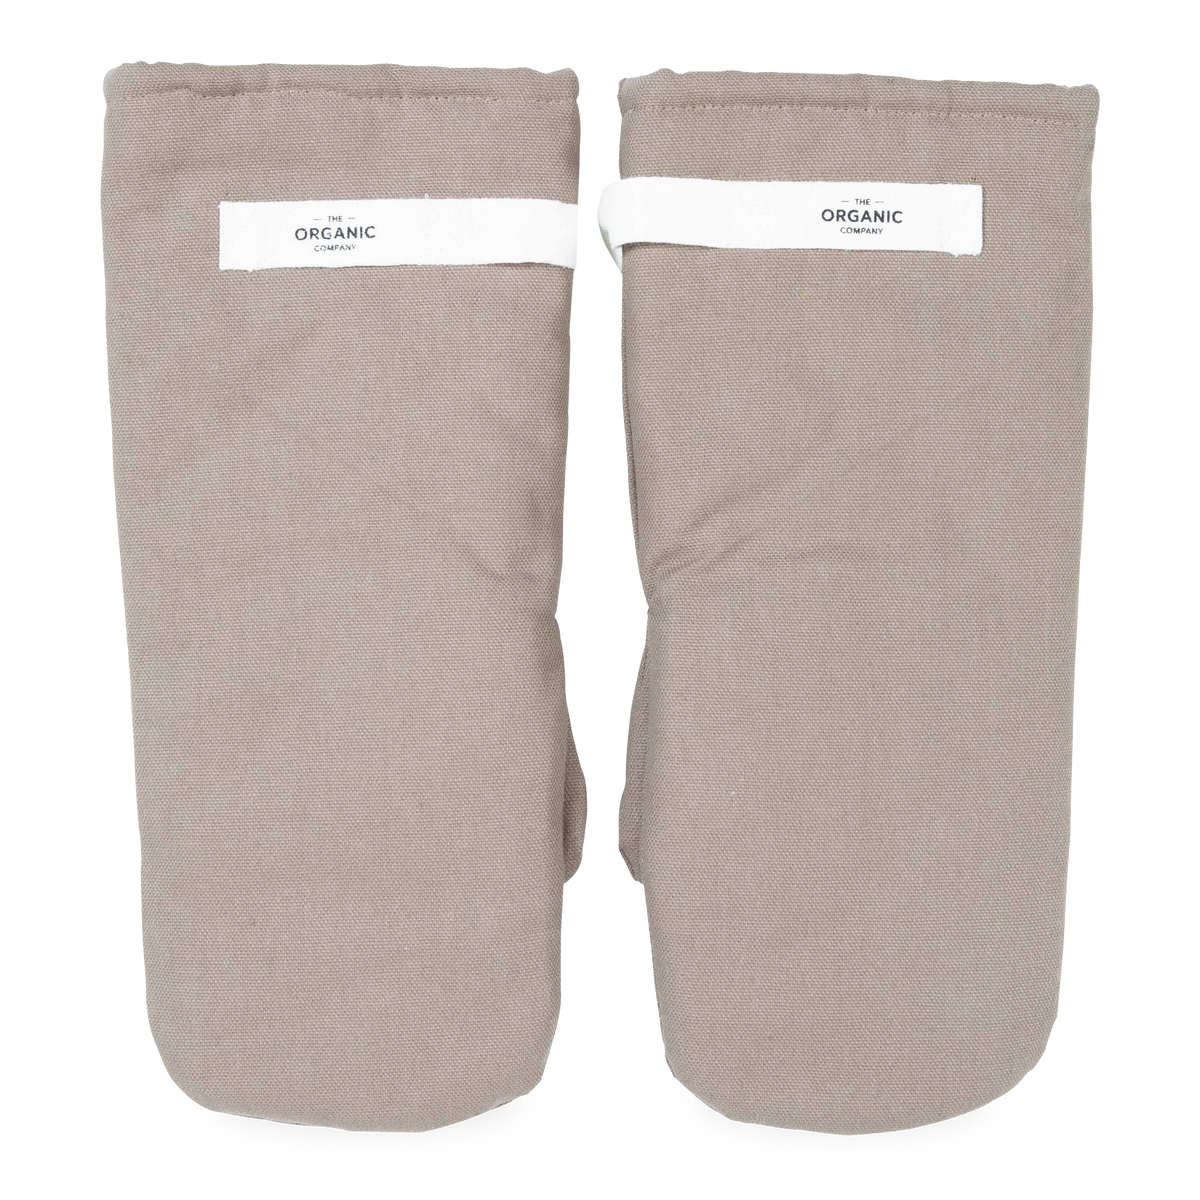 This Organic Cotton Oven Mitt set is perfect for protecting your hands and arms while working with heat in the kitchen.